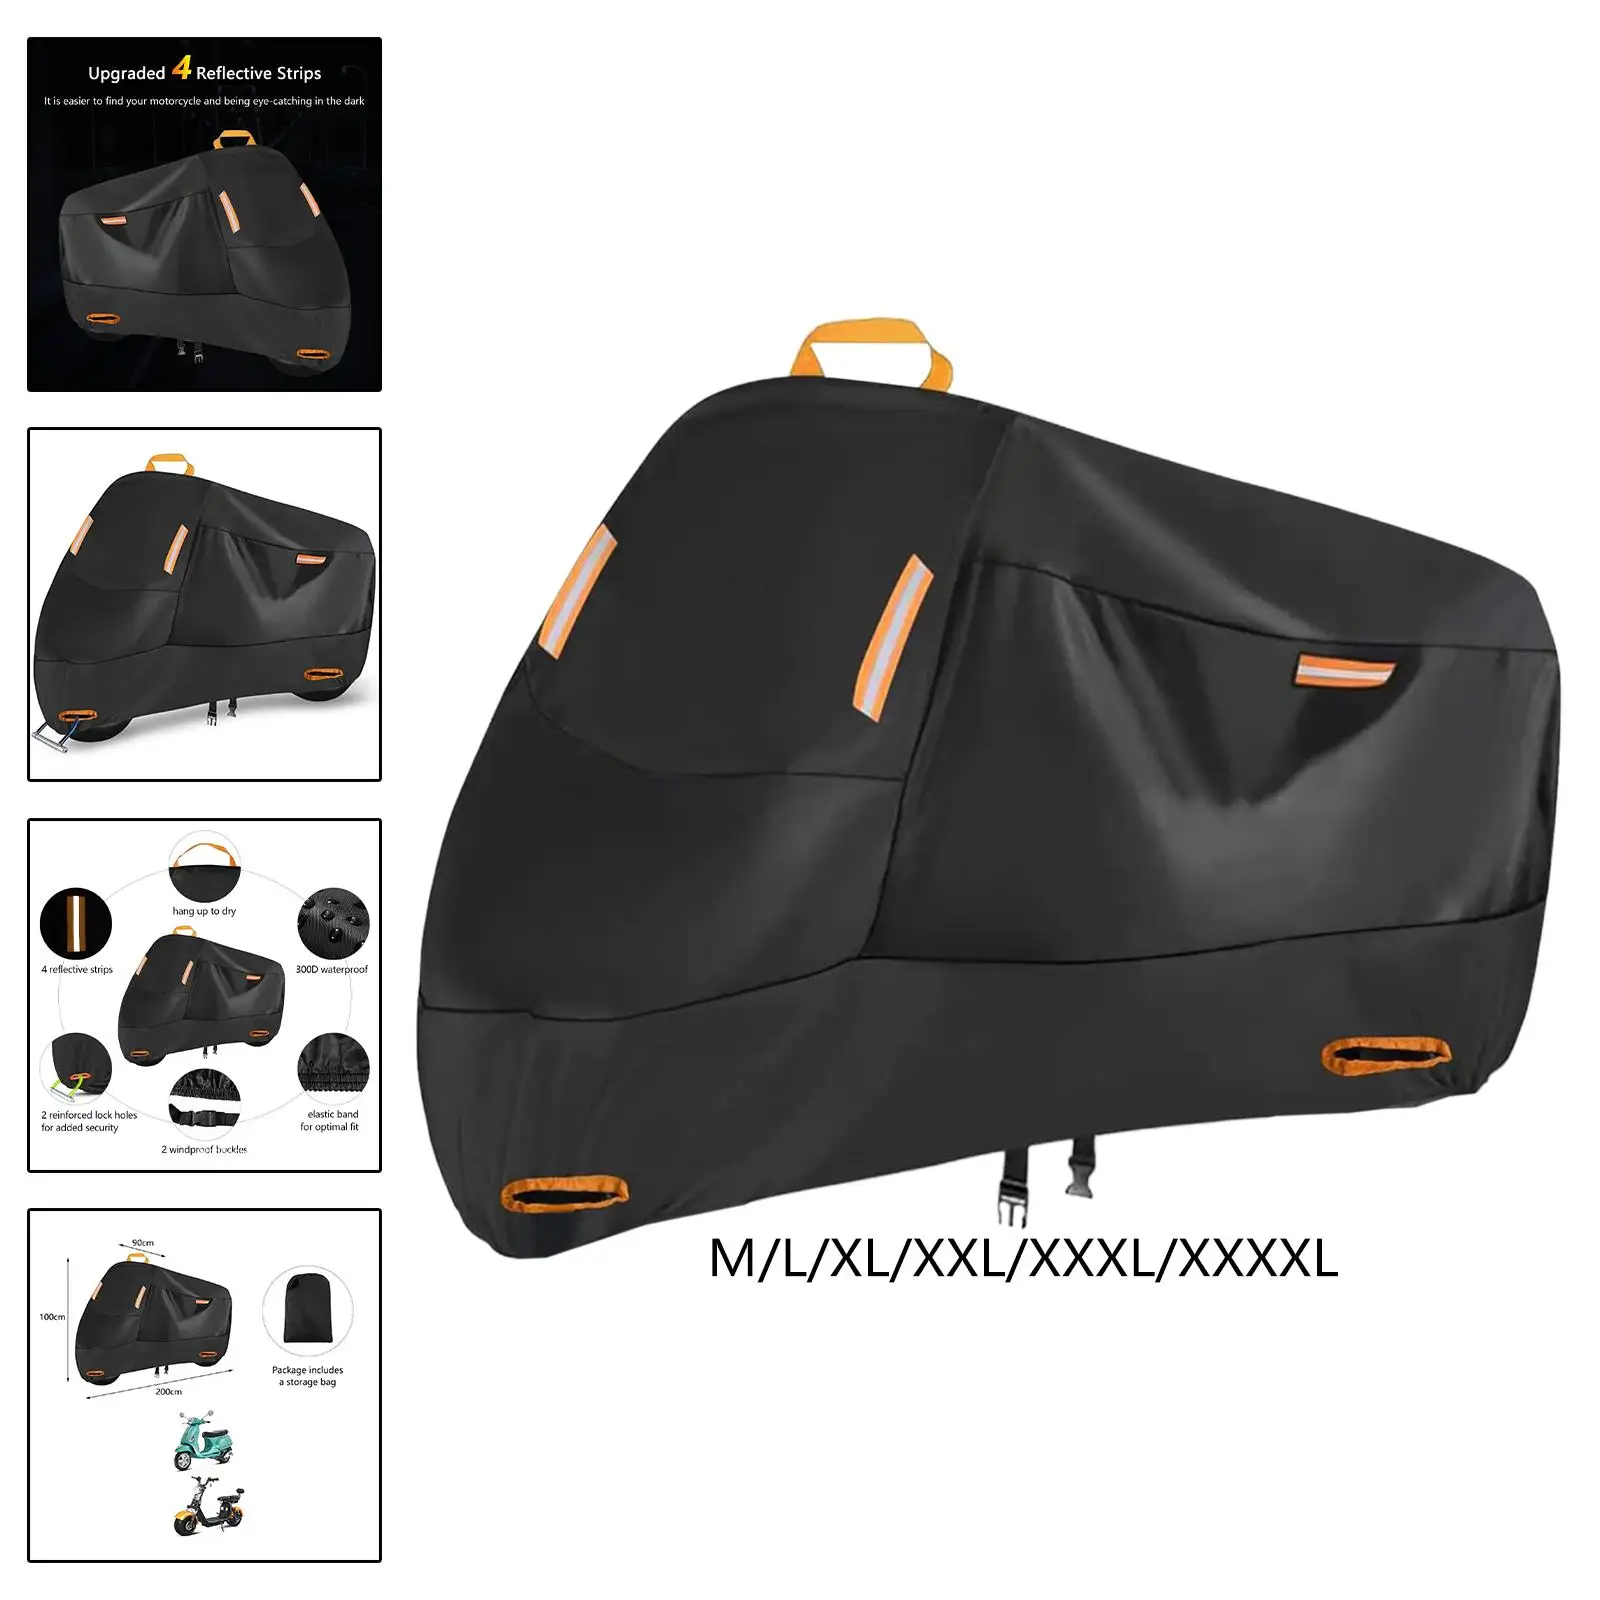 210D Motorcycle Cover Motocross Rain Cover for Scooter Bike All Season